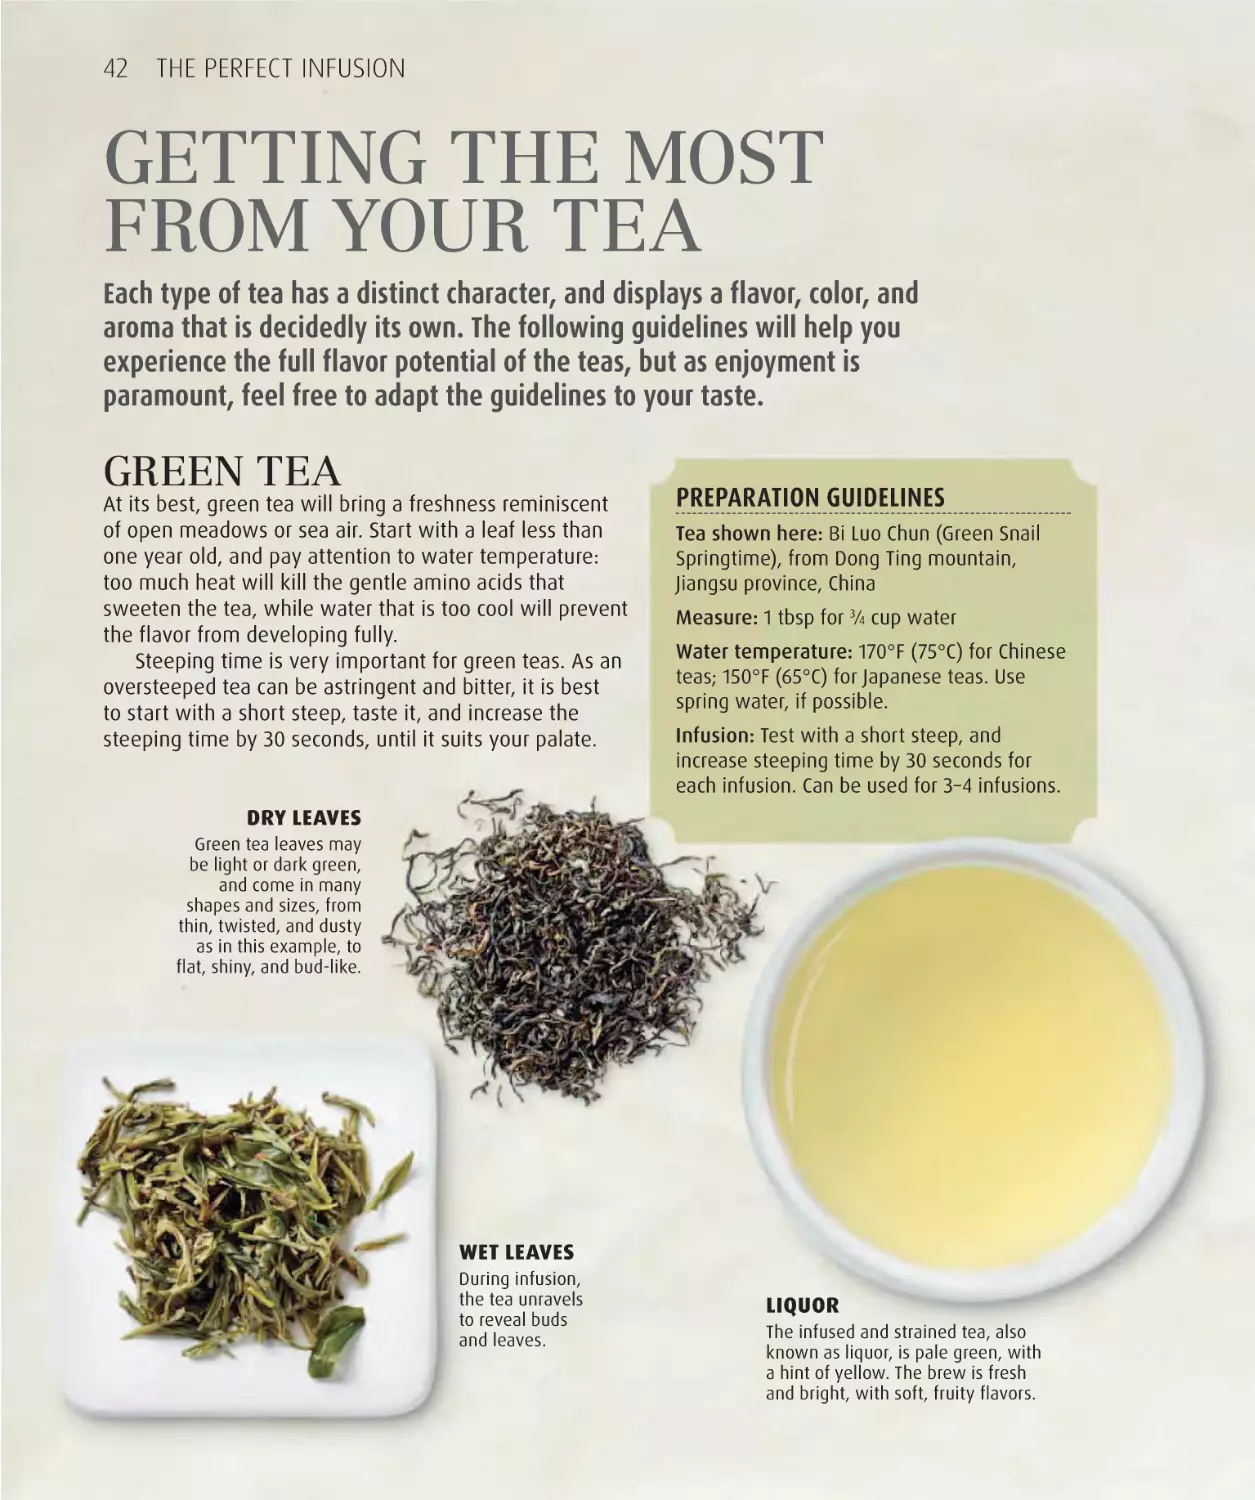 Getting the most from your tea 42